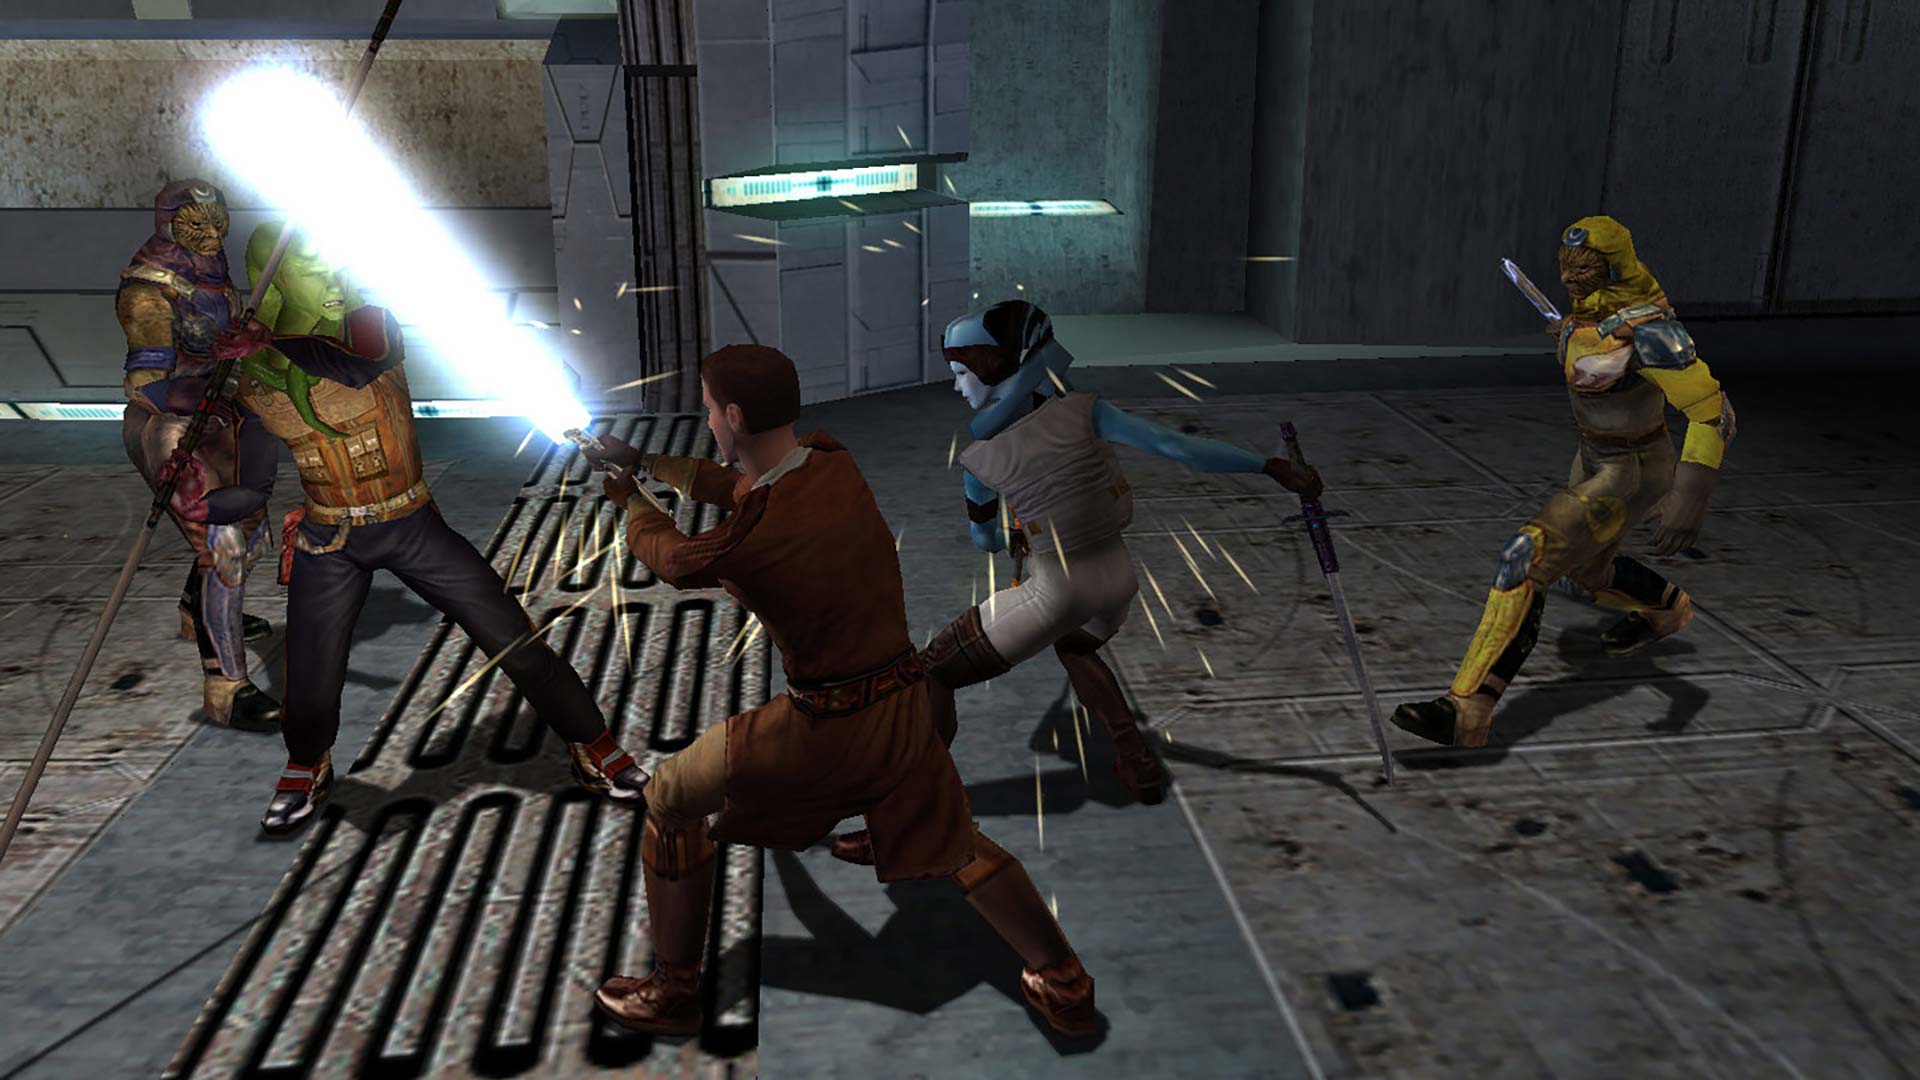 Star Wars: Knights of the Old Republic combat